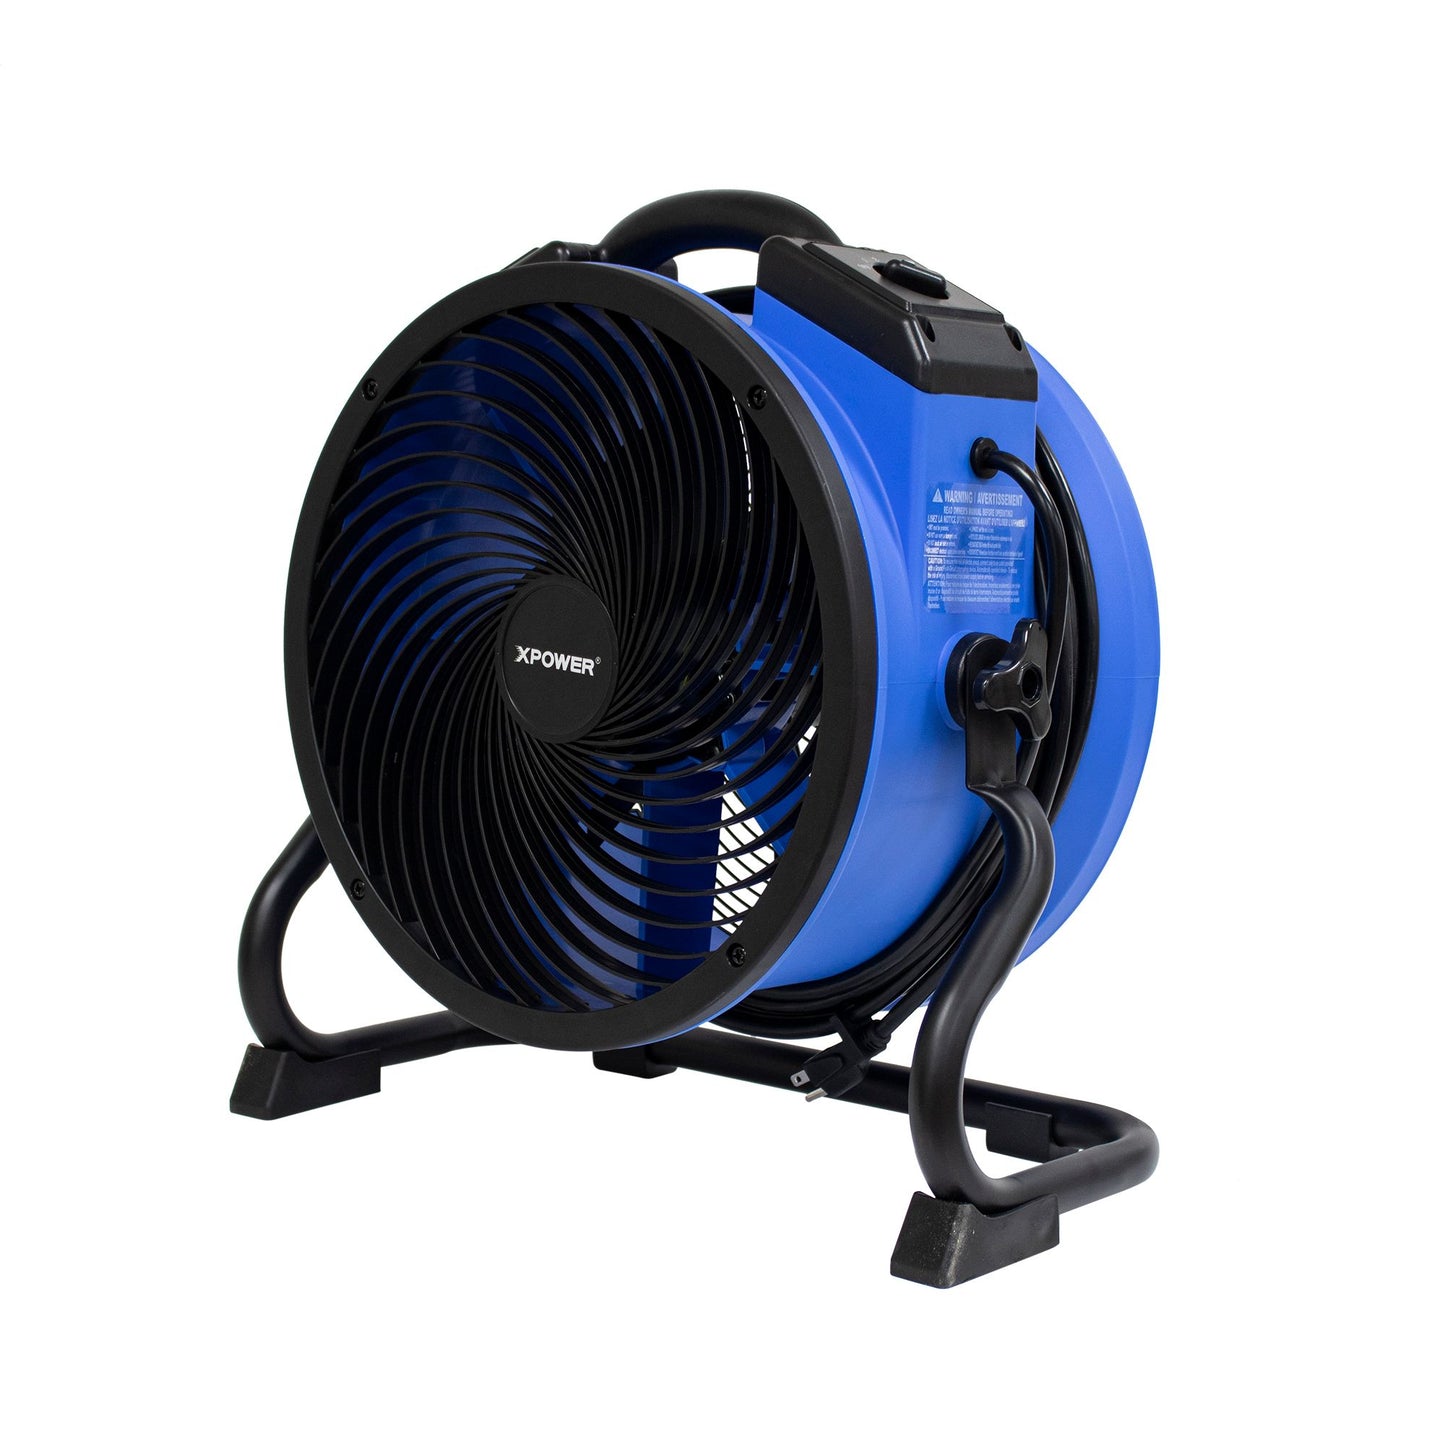 XPOWER FC-300A Multipurpose 14” Pro Air Circulator Utility Fan with Daisy Chain